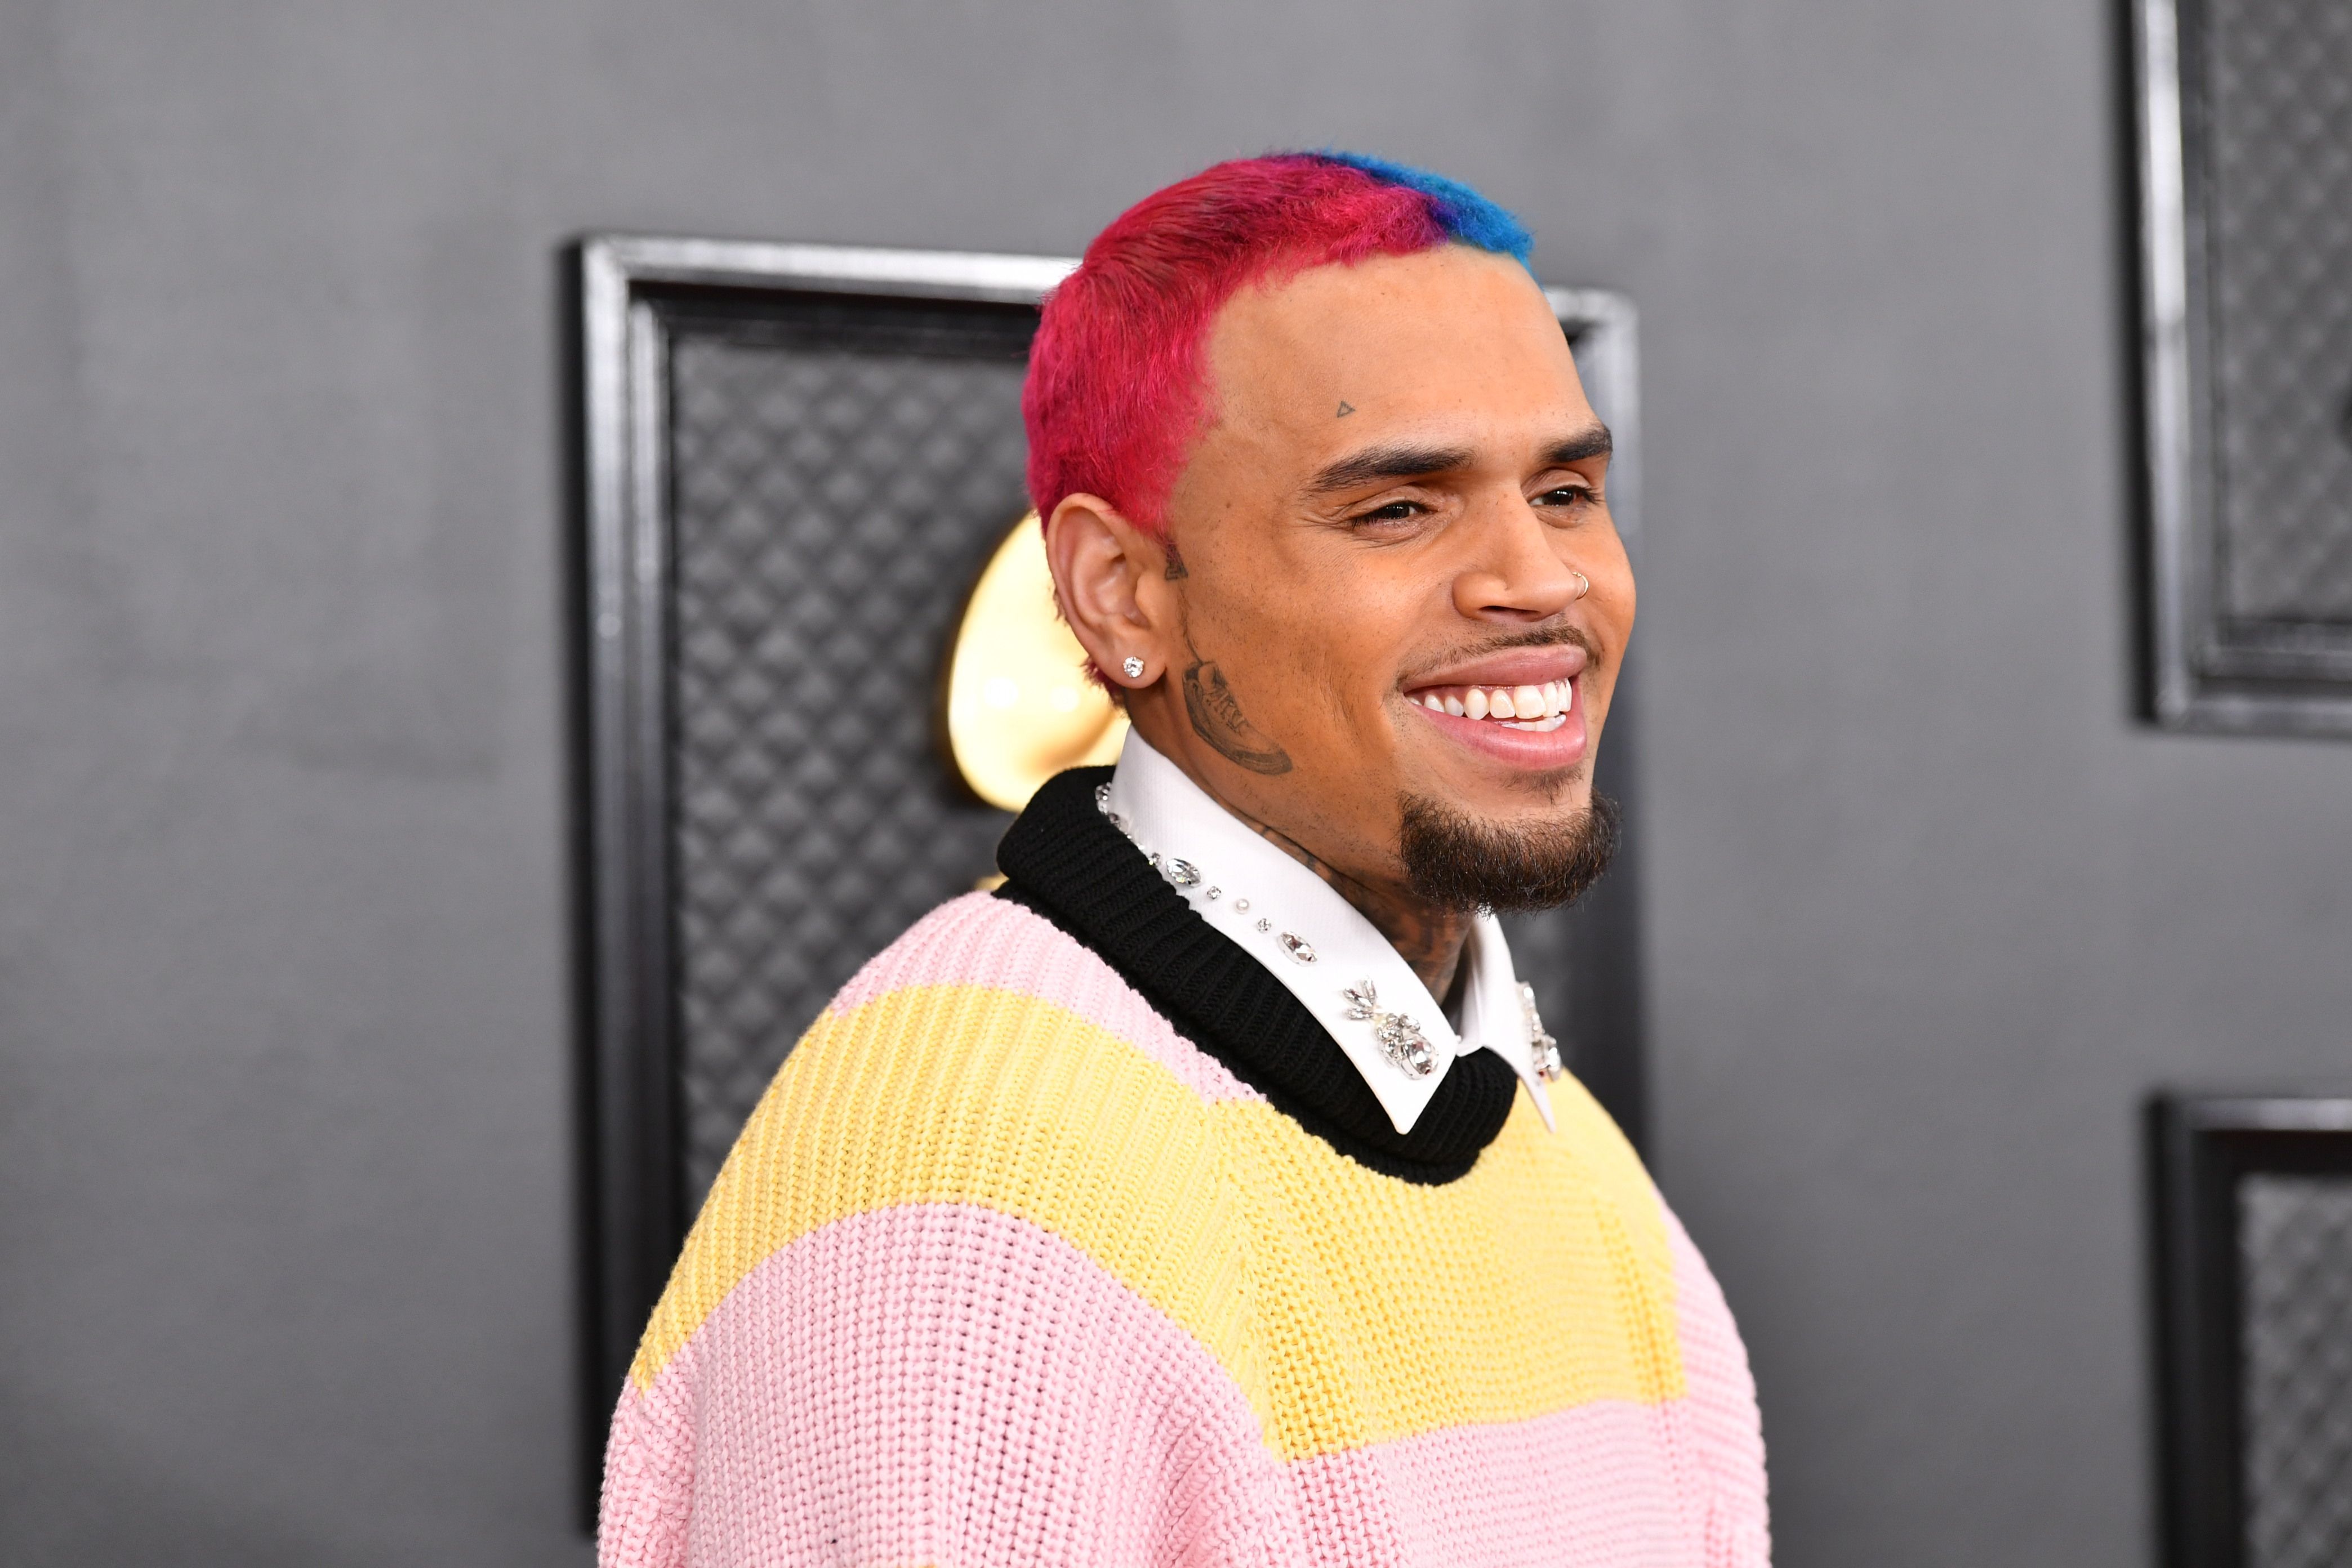 R&B singer Chris Brown arrives at the 62nd Annual Grammy Awards at Staples Center in January 2020 | Photo: Getty Images